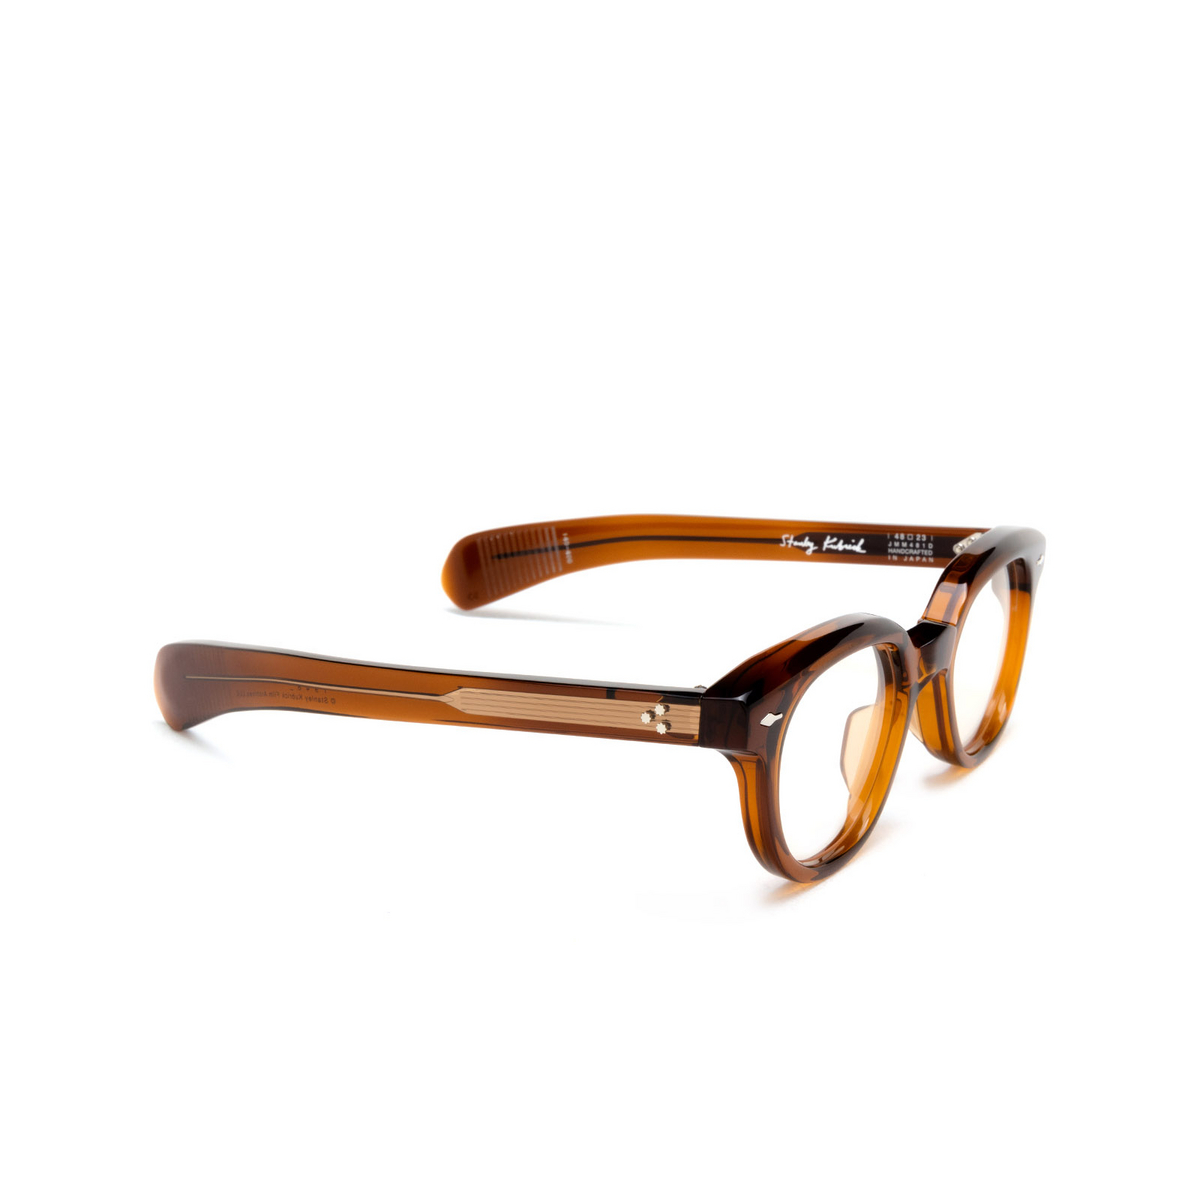 Jacques Marie Mage 1948 Eyeglasses HICKORY - three-quarters view